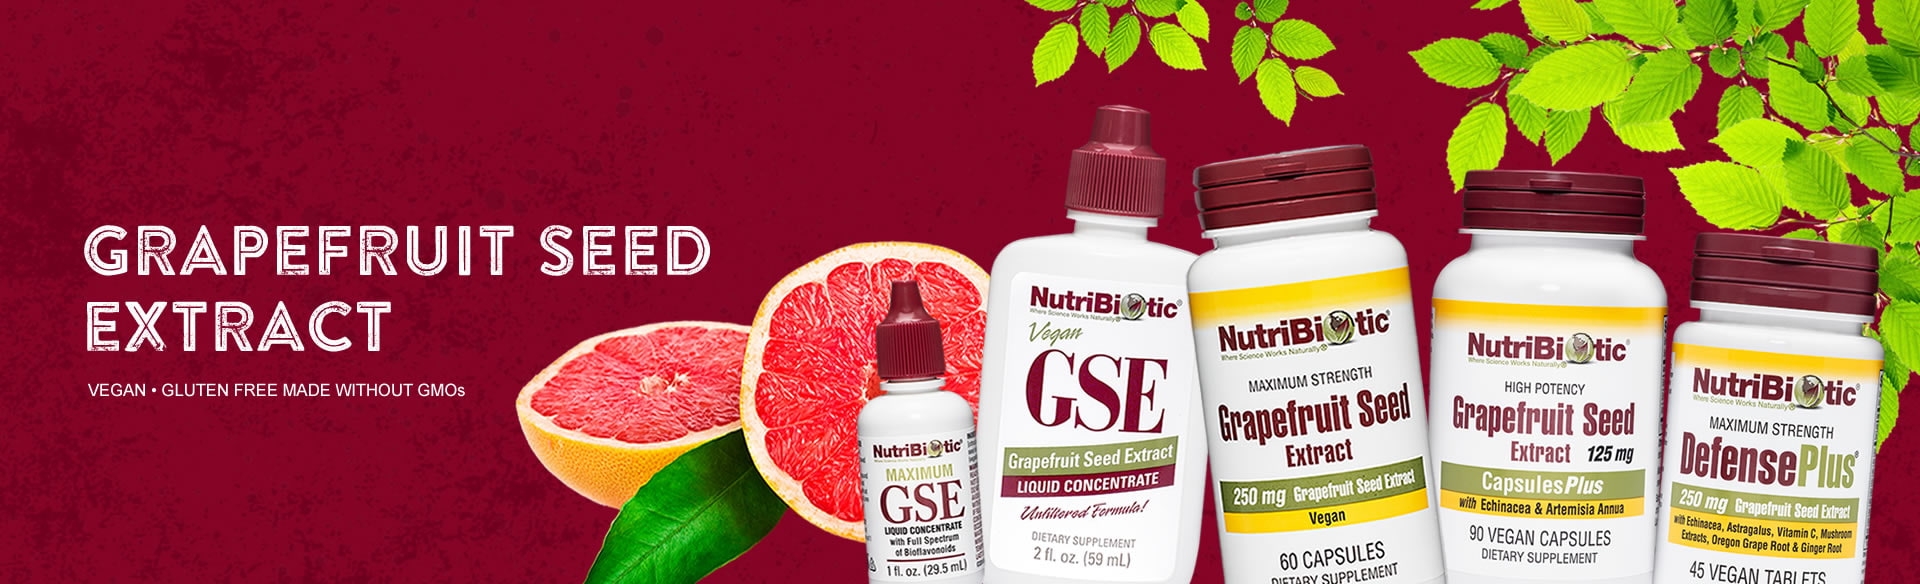 GSE Supplements